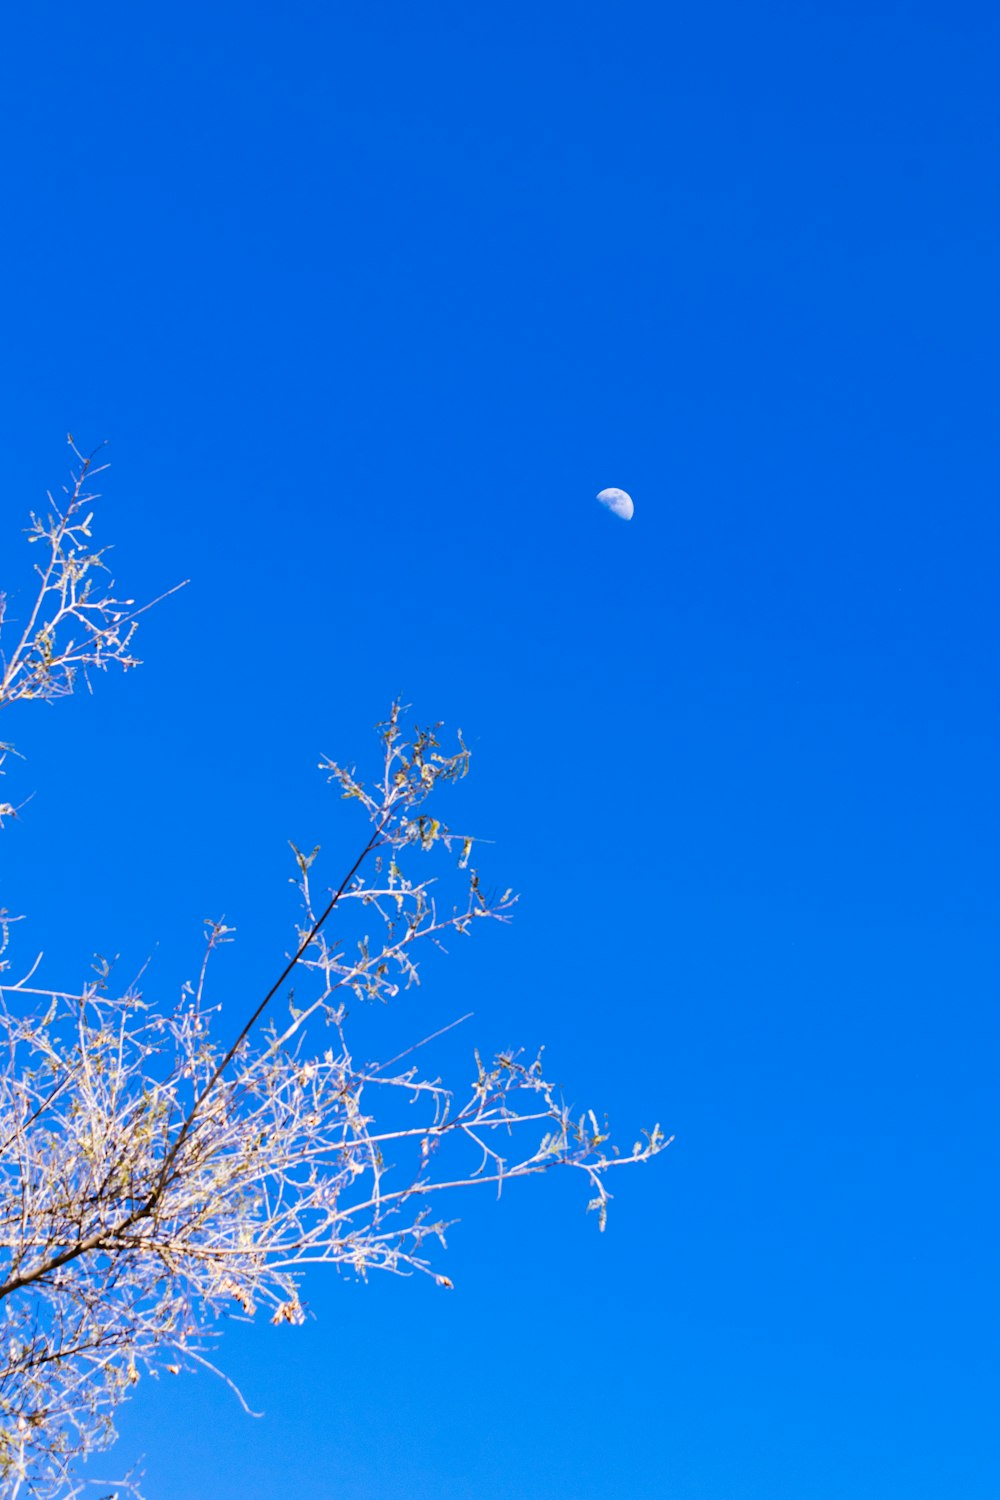 a clear blue sky with a half moon in the distance